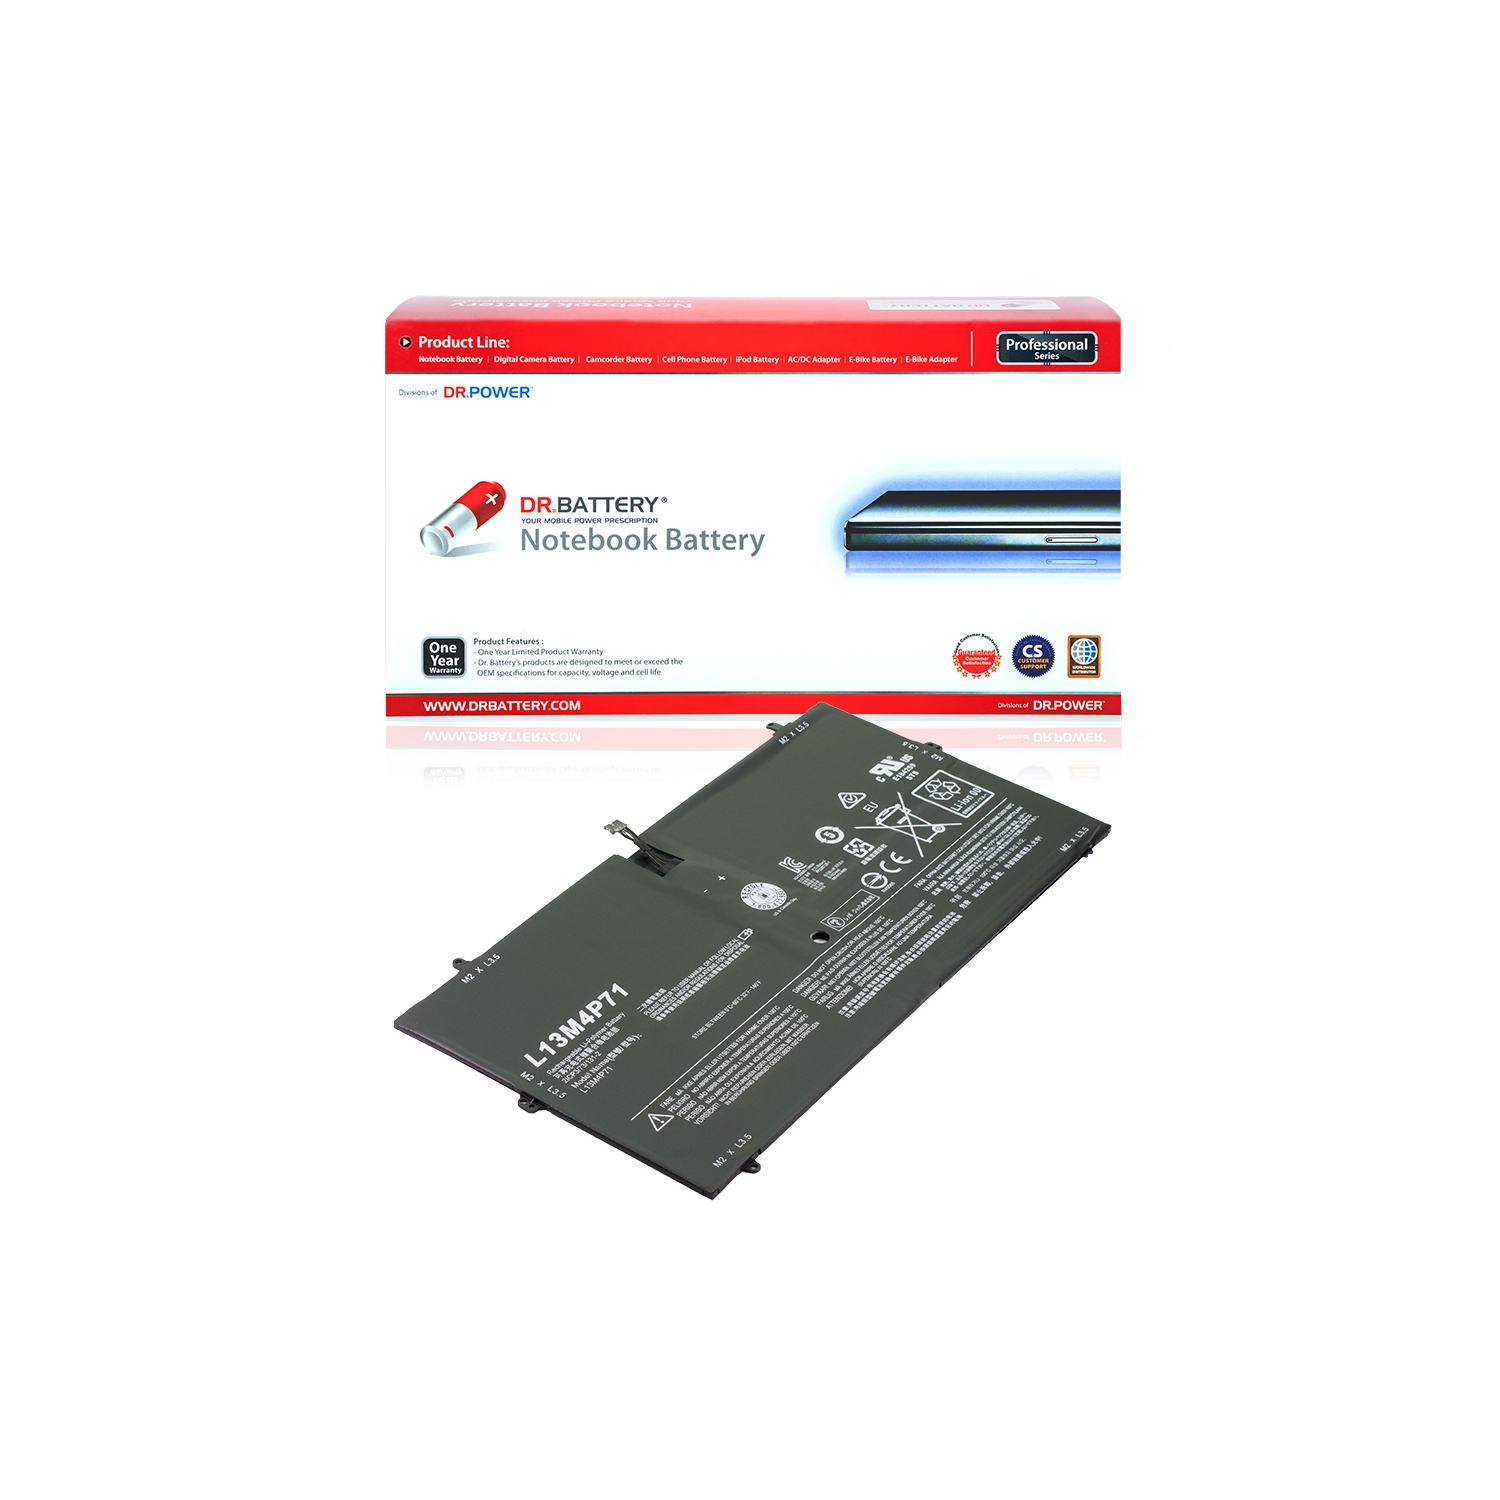 DR. BATTERY - Replacement for Lenovo Yoga 3 Pro-I5Y70 / Pro-I5Y70(D) / Pro-I5Y70(F) / Pro-I5Y70(L) / L13M4P71 / L14S4P71